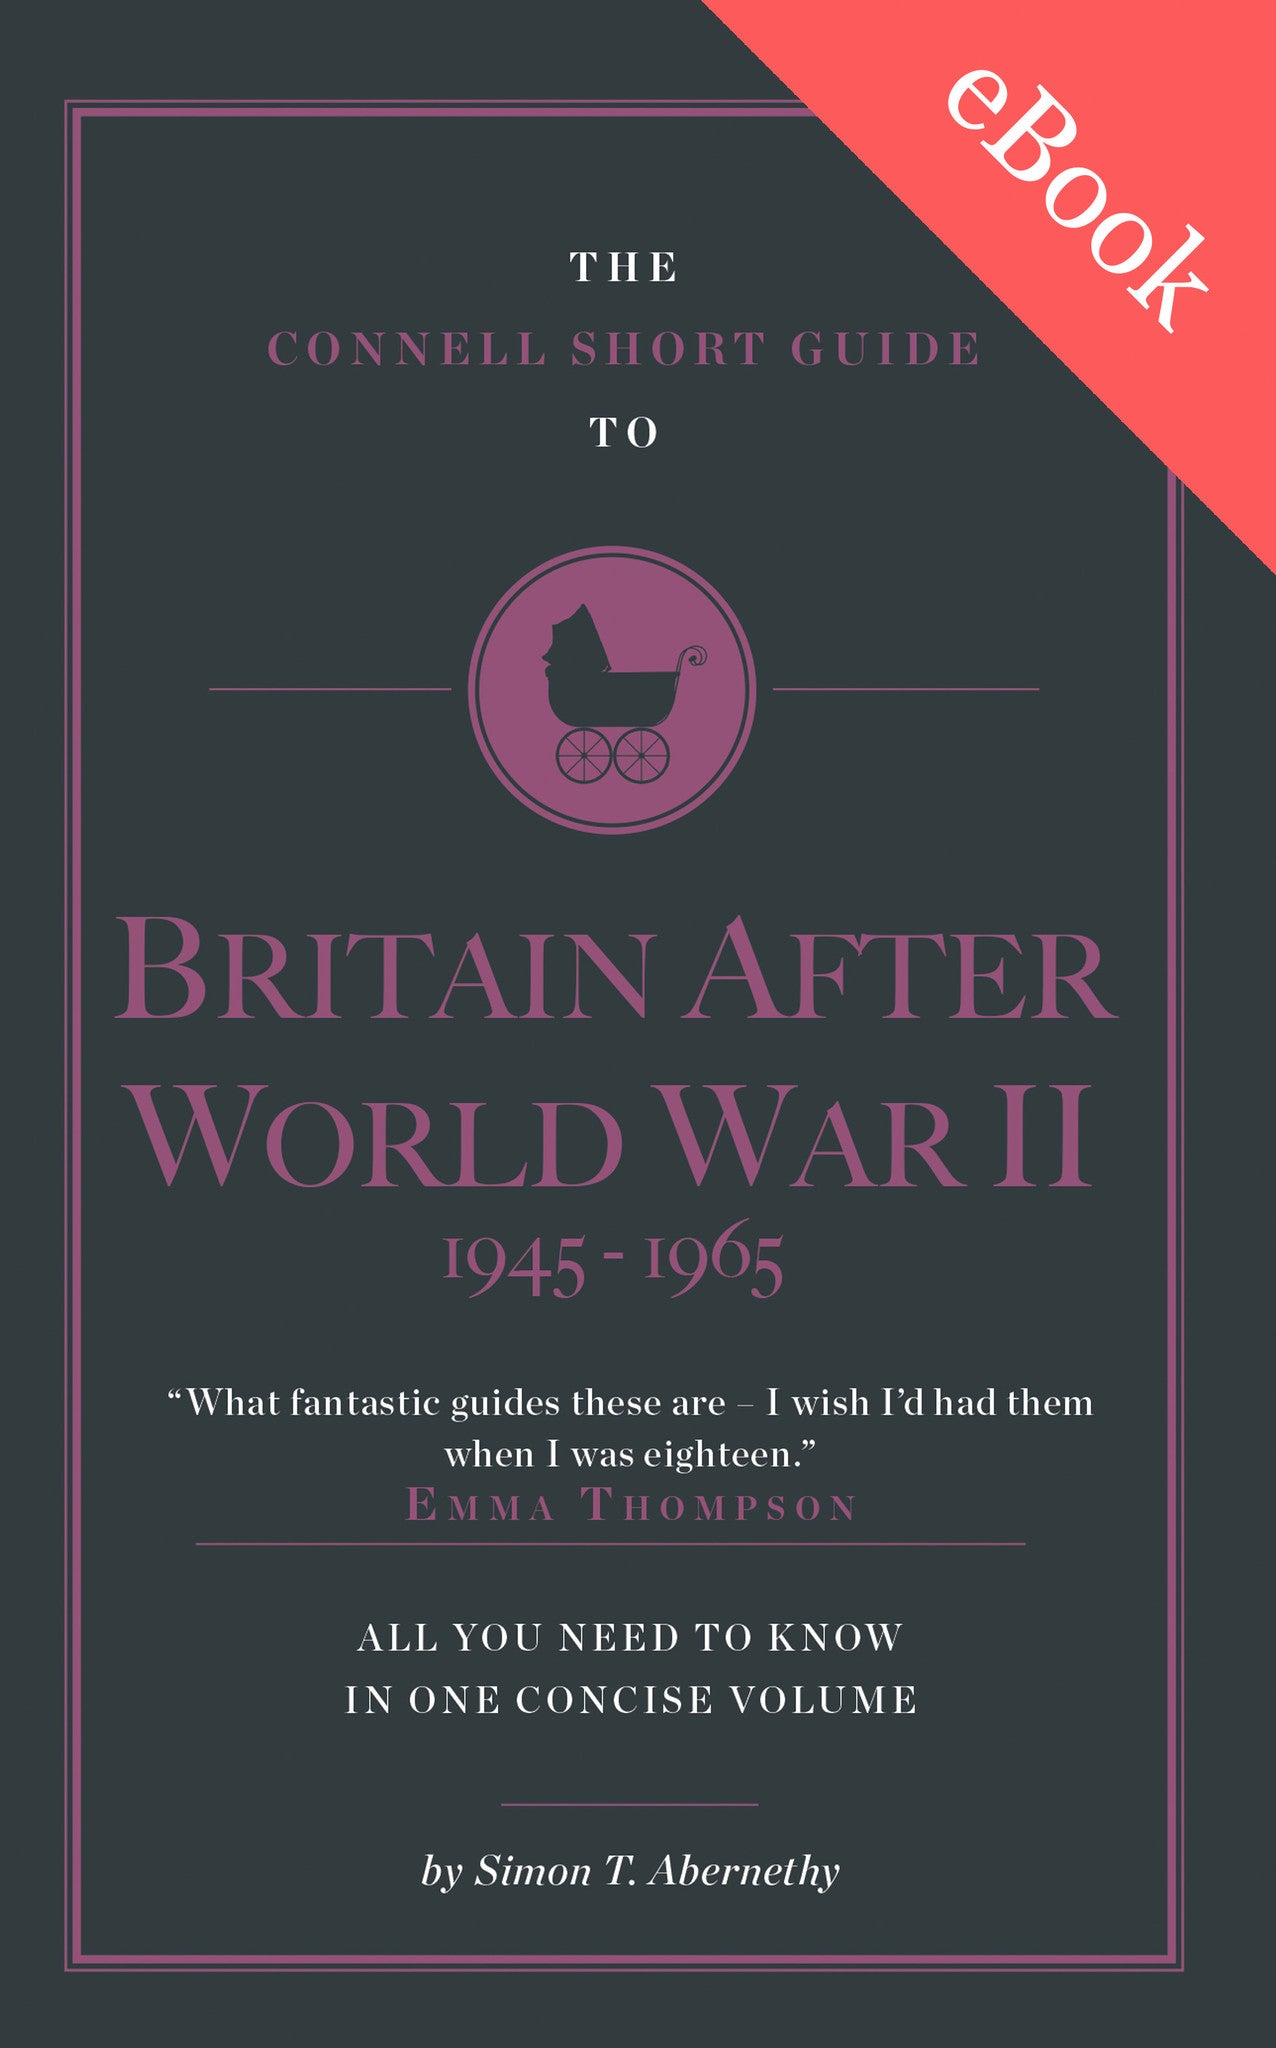 The Connell Short Guide to Britain After World War II